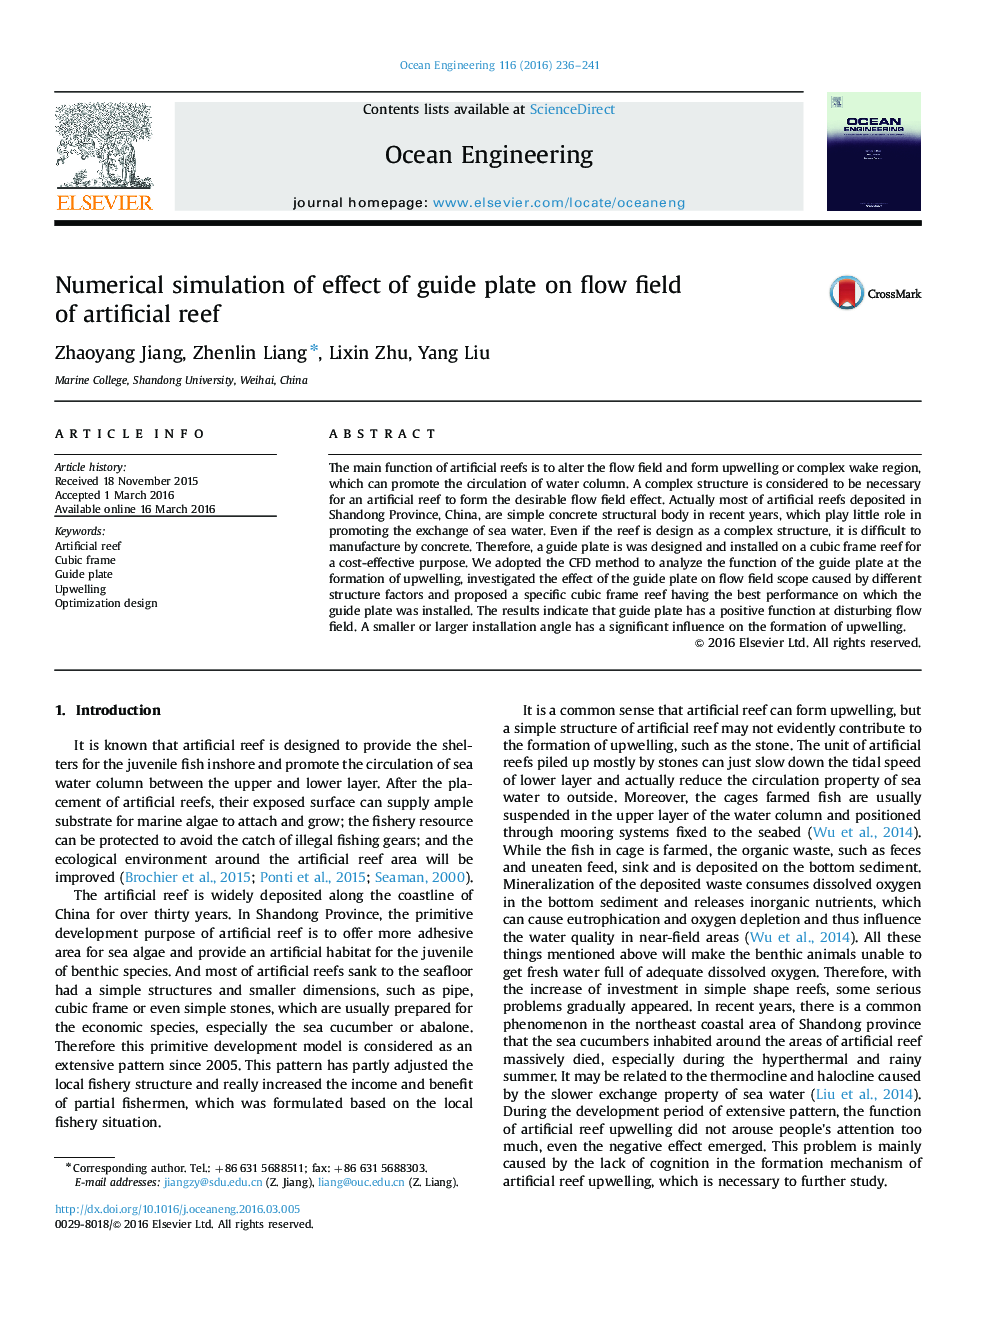 Numerical simulation of effect of guide plate on flow field of artificial reef